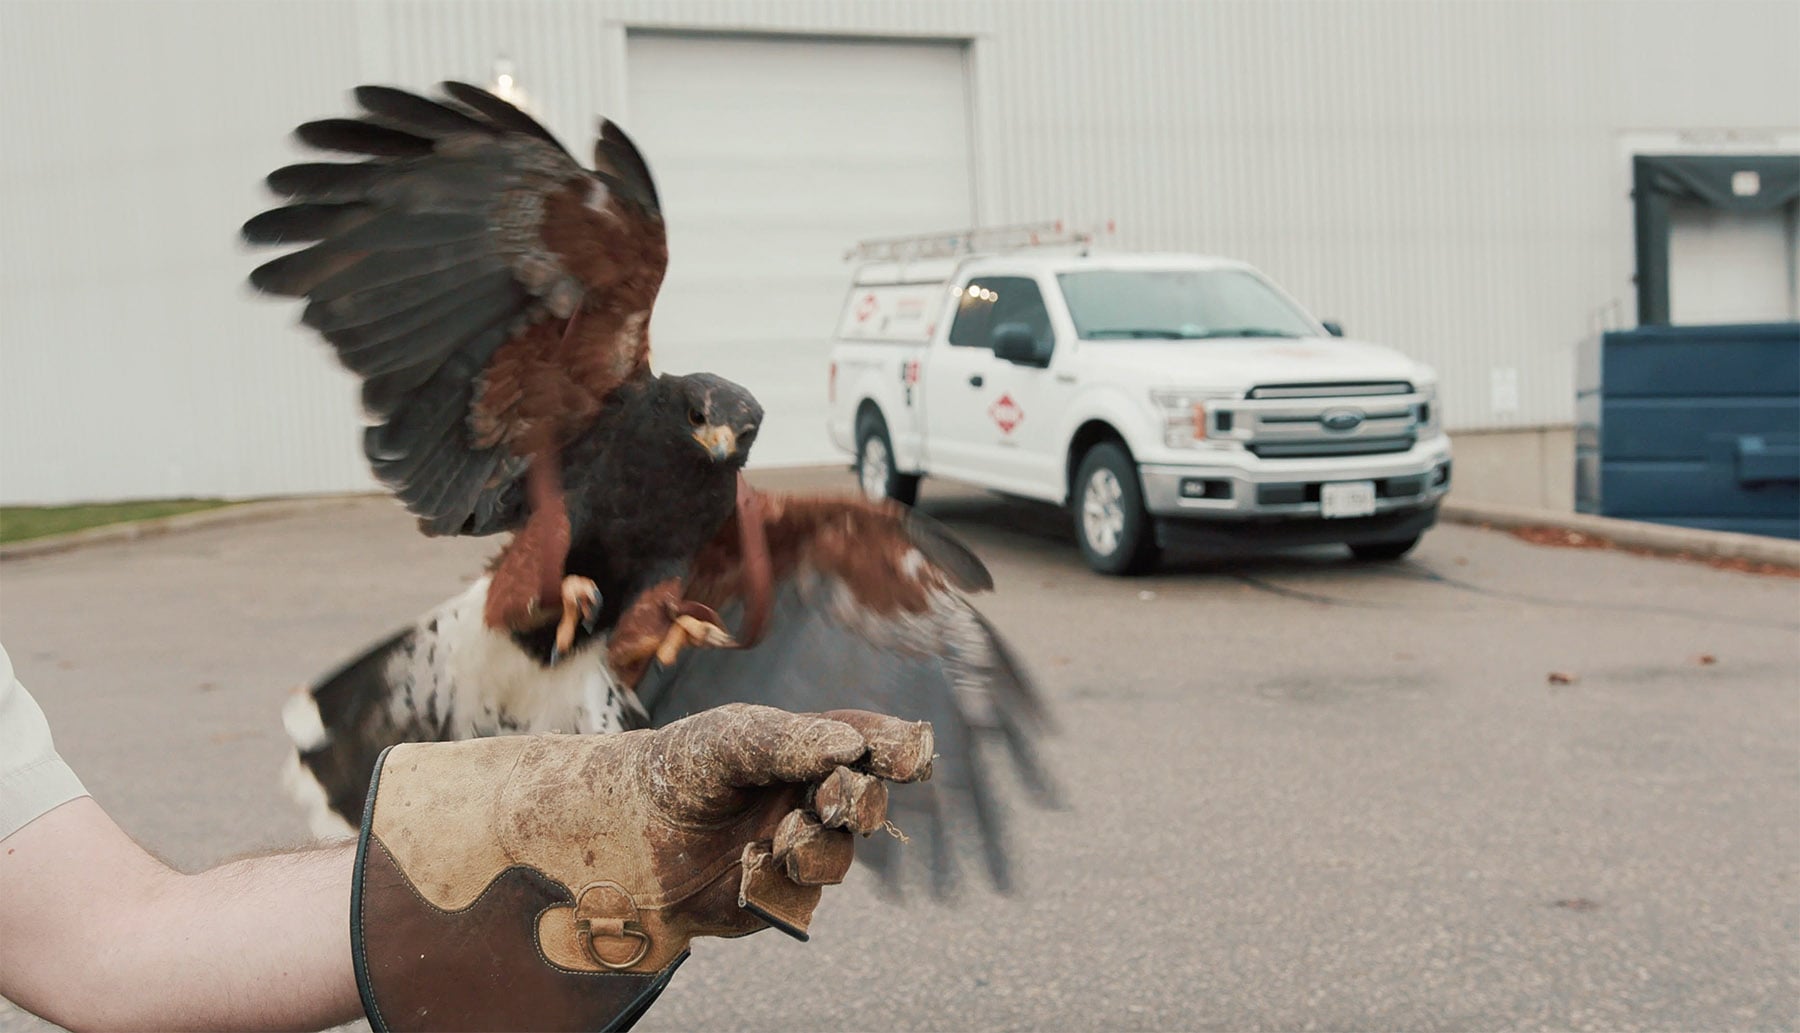 bird of prey flying to gloved hand with Orkin Truck in the background